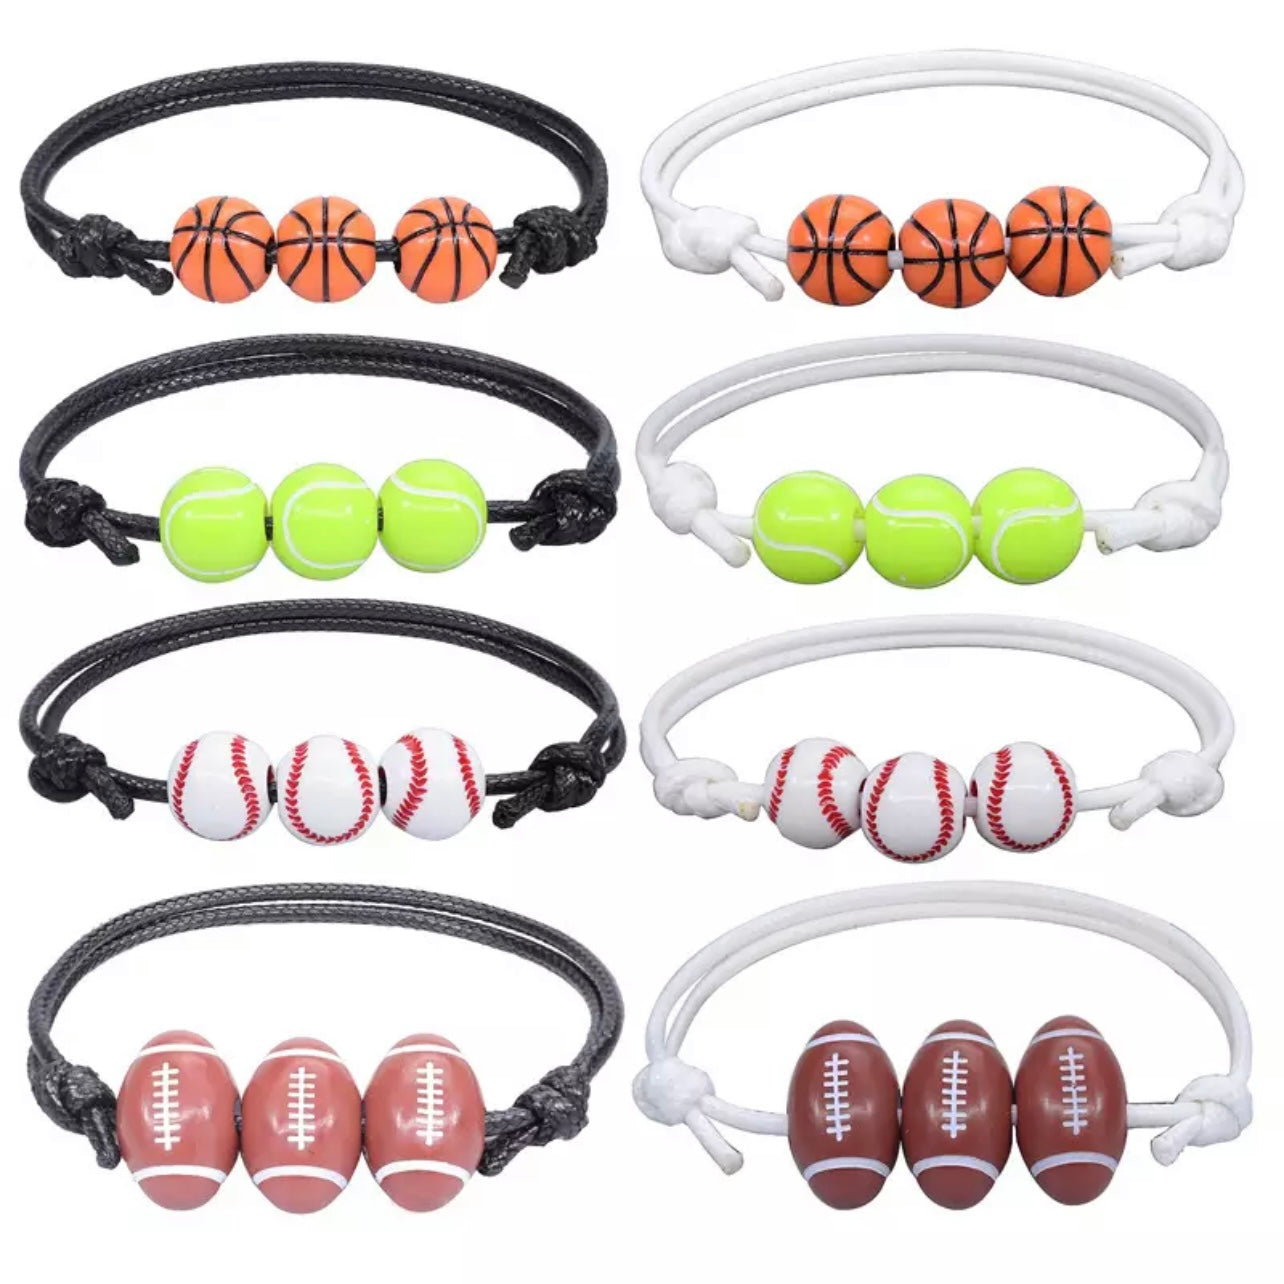 Soccer Sports Rosaries - Yellow and Black - White and Black - White and  Blue - Red, White and Blue - Pink and White - Soccer Team Colors